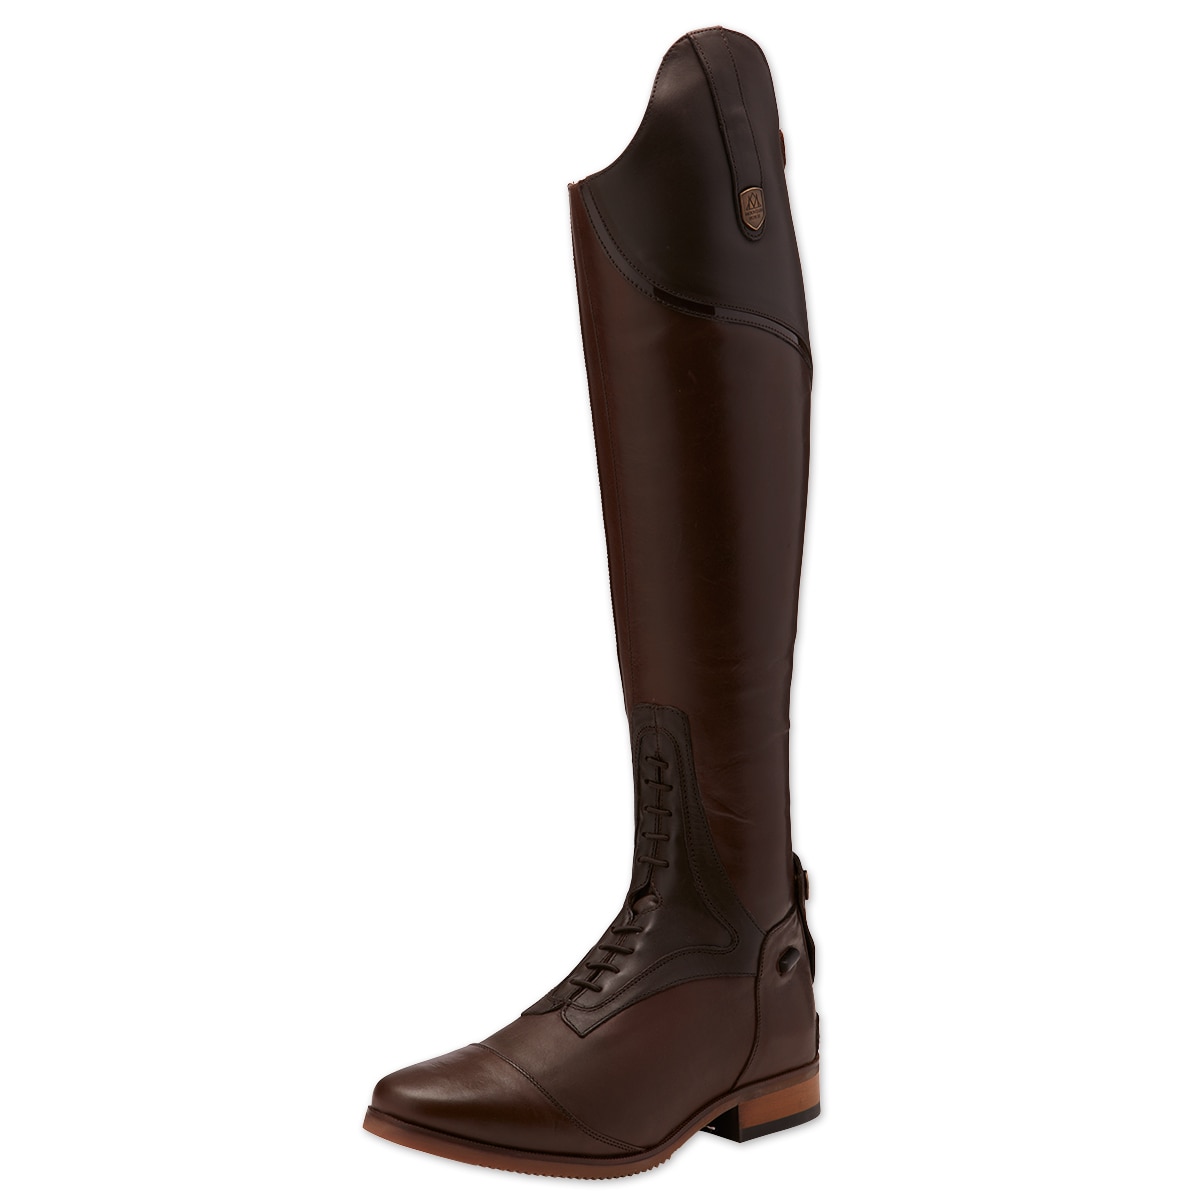 Buy > chocolate brown tall boots > in stock